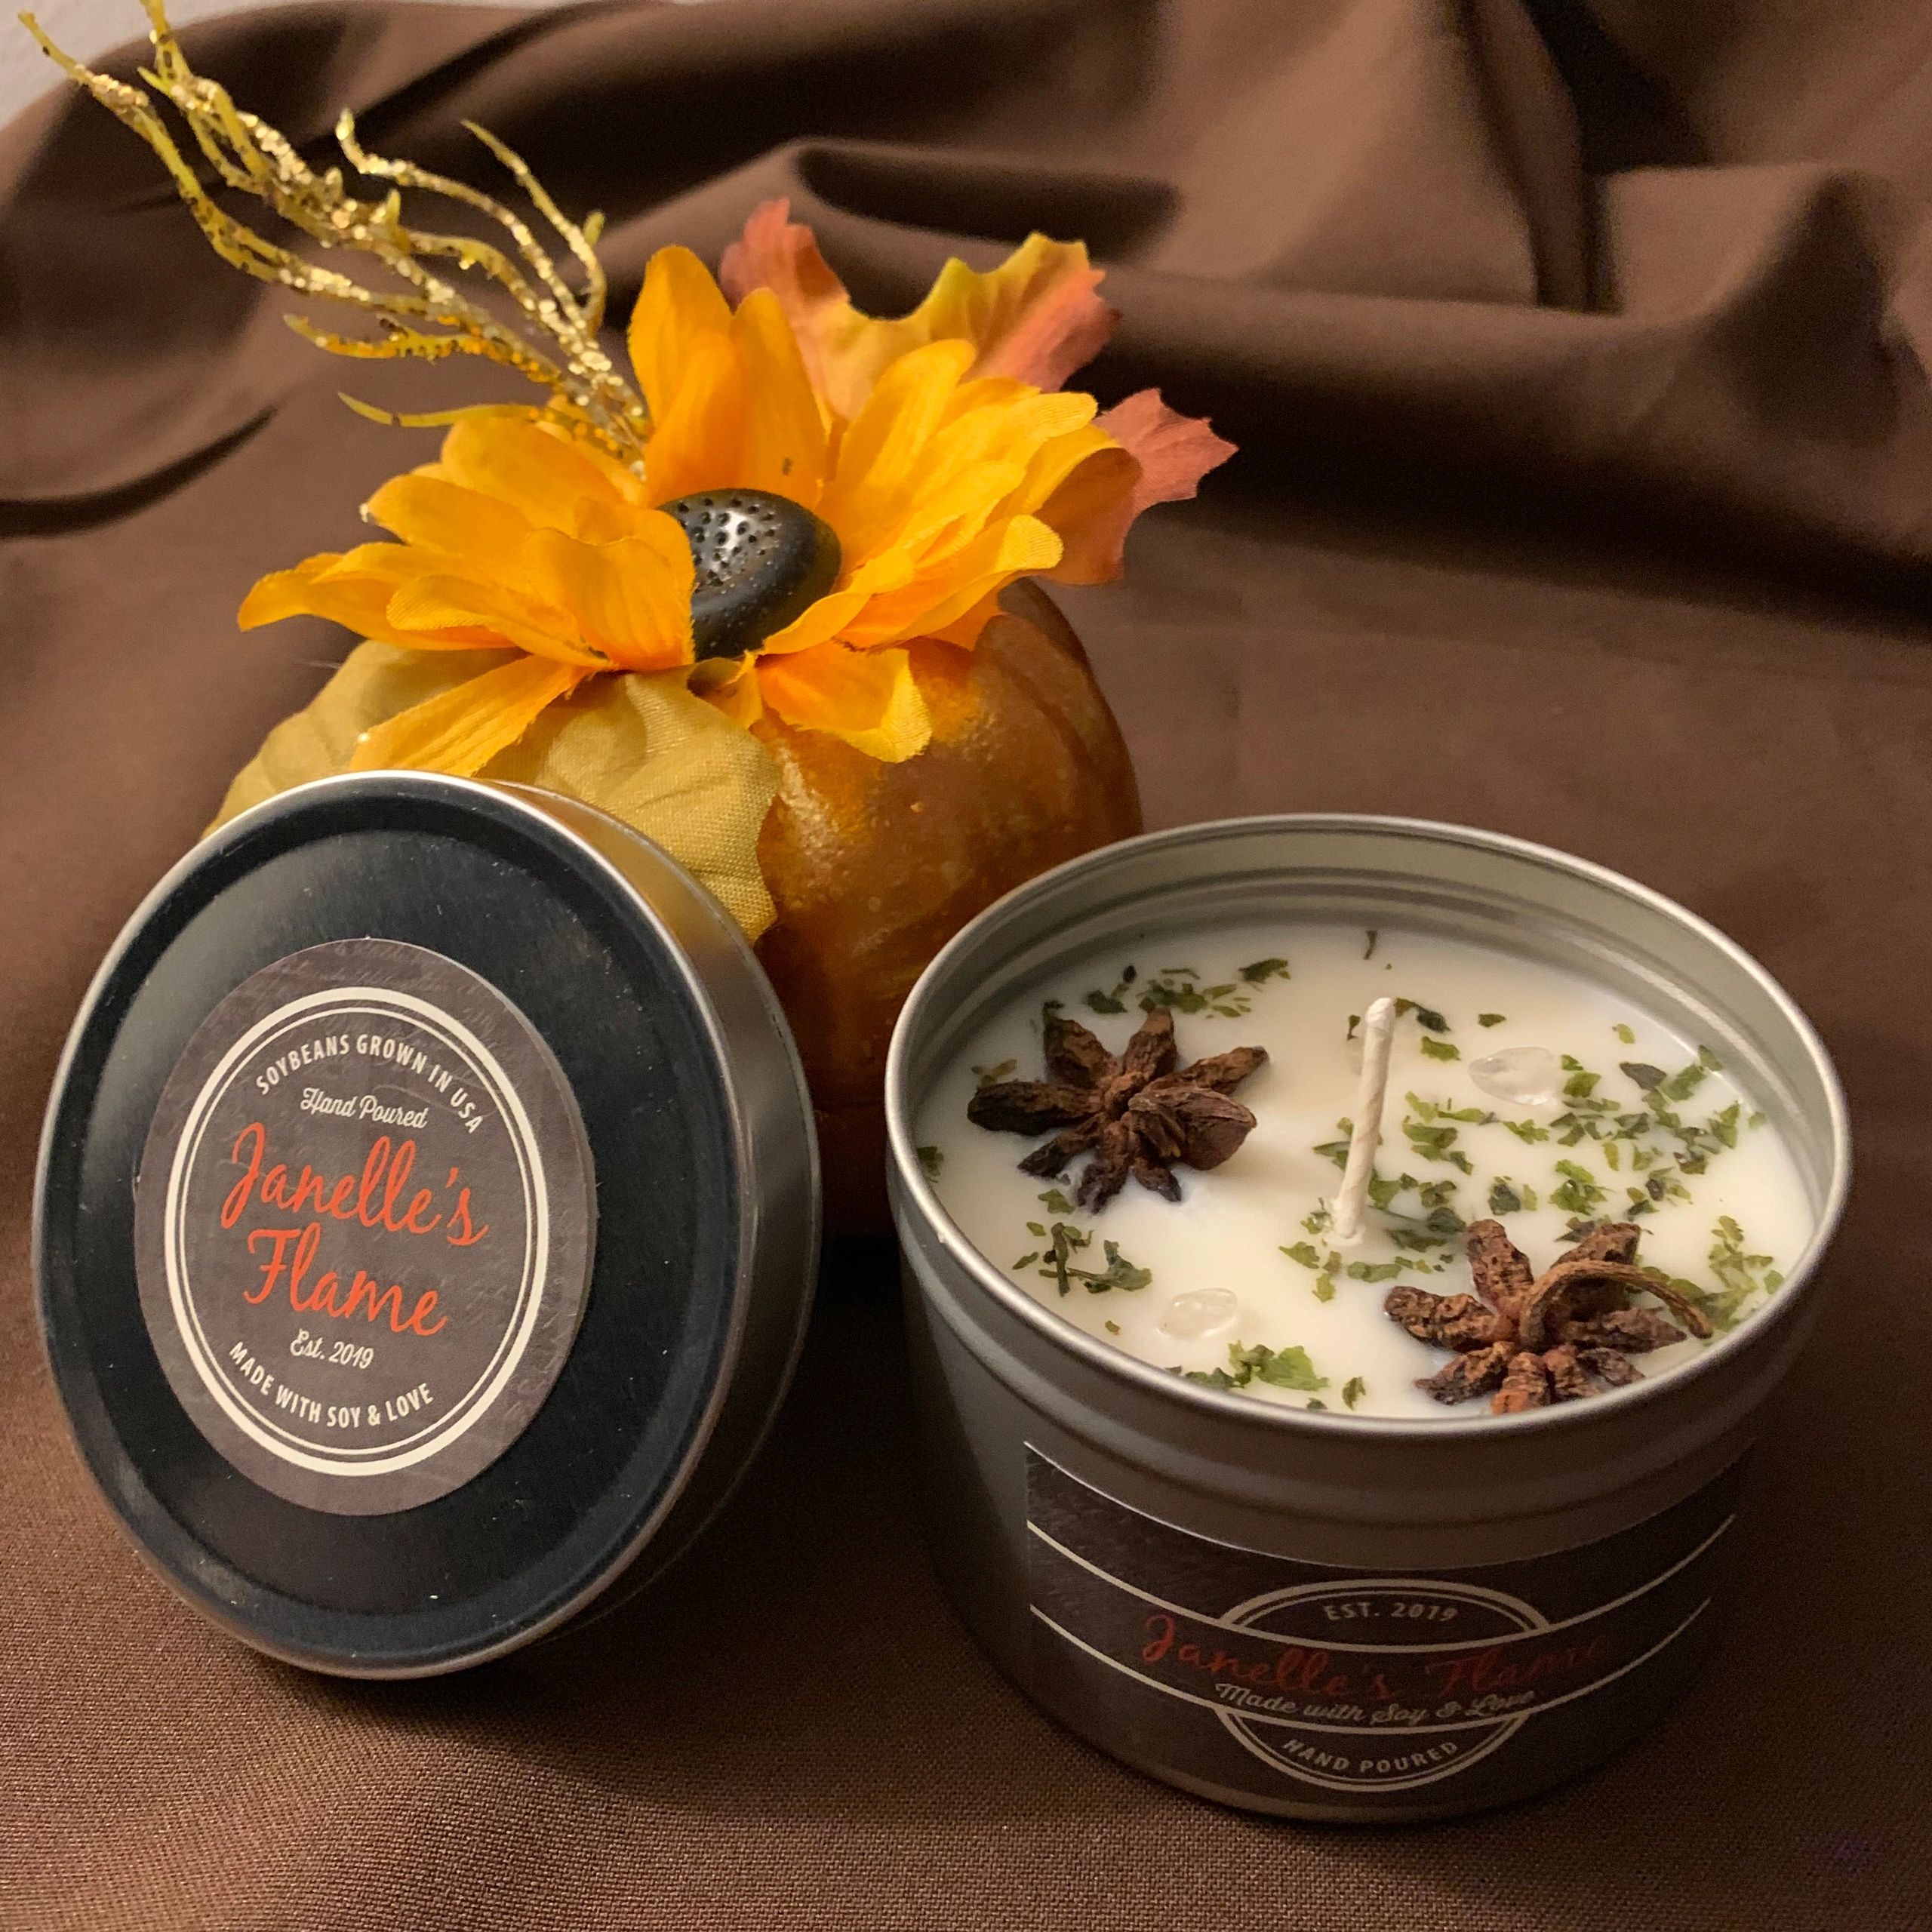 Janelle’s Flame - Soy Candles, Candles, Candle Store